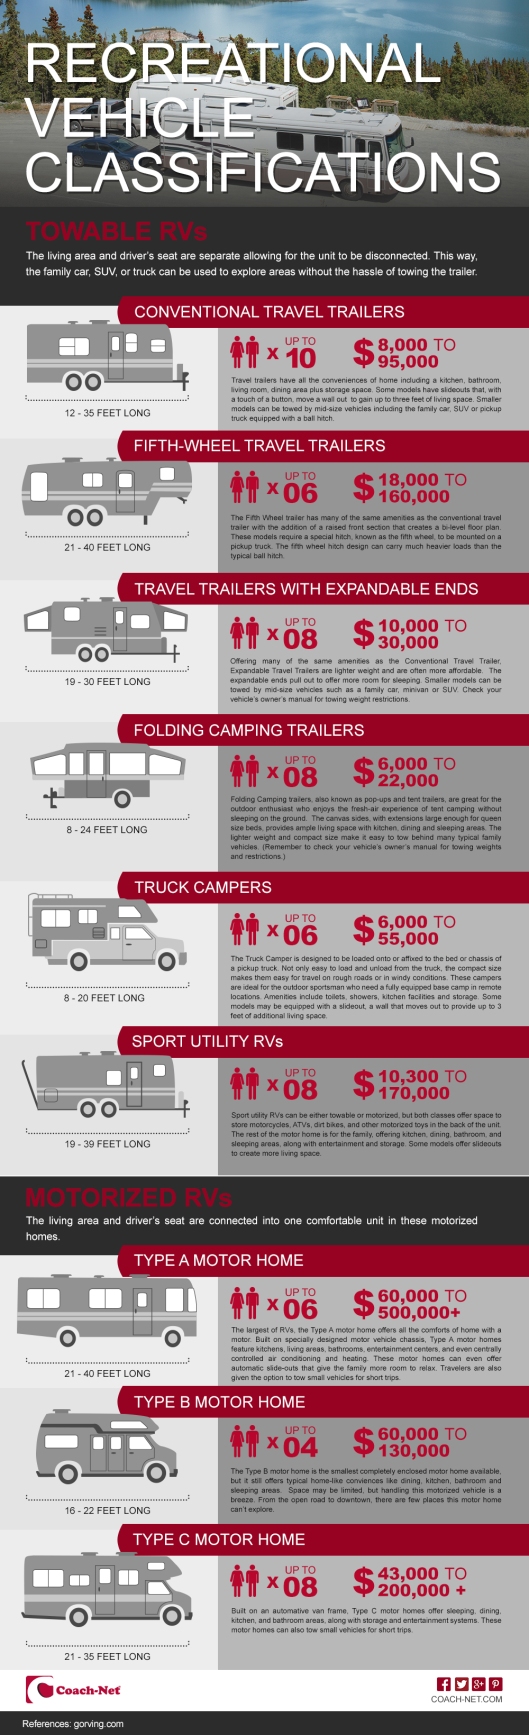 RV Classifications Infographic